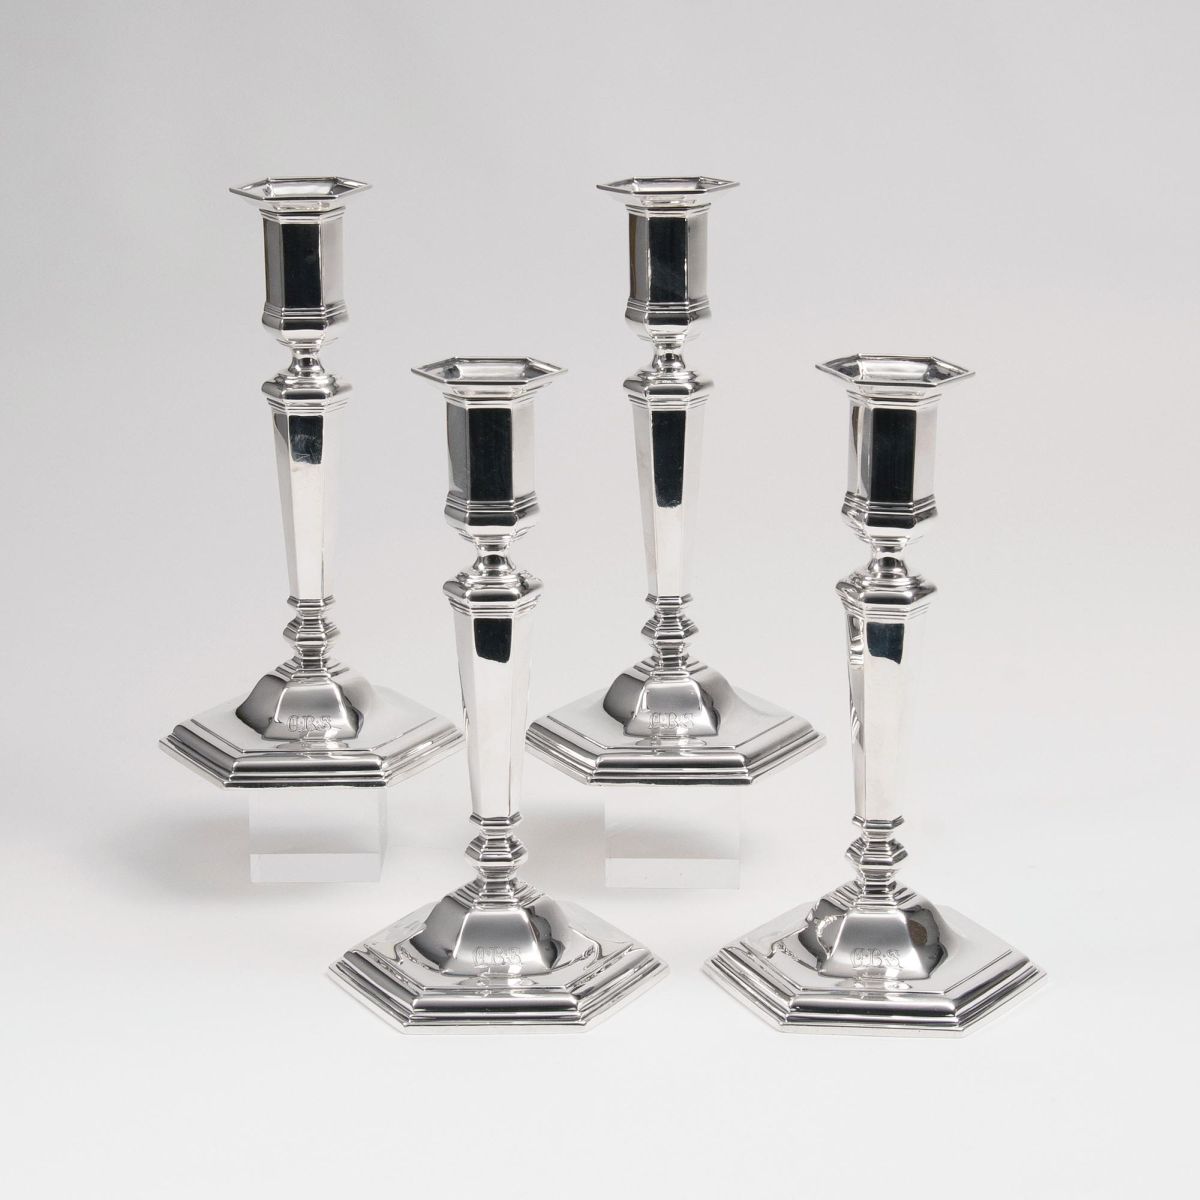 A Set of 4 Rare Candle Holders